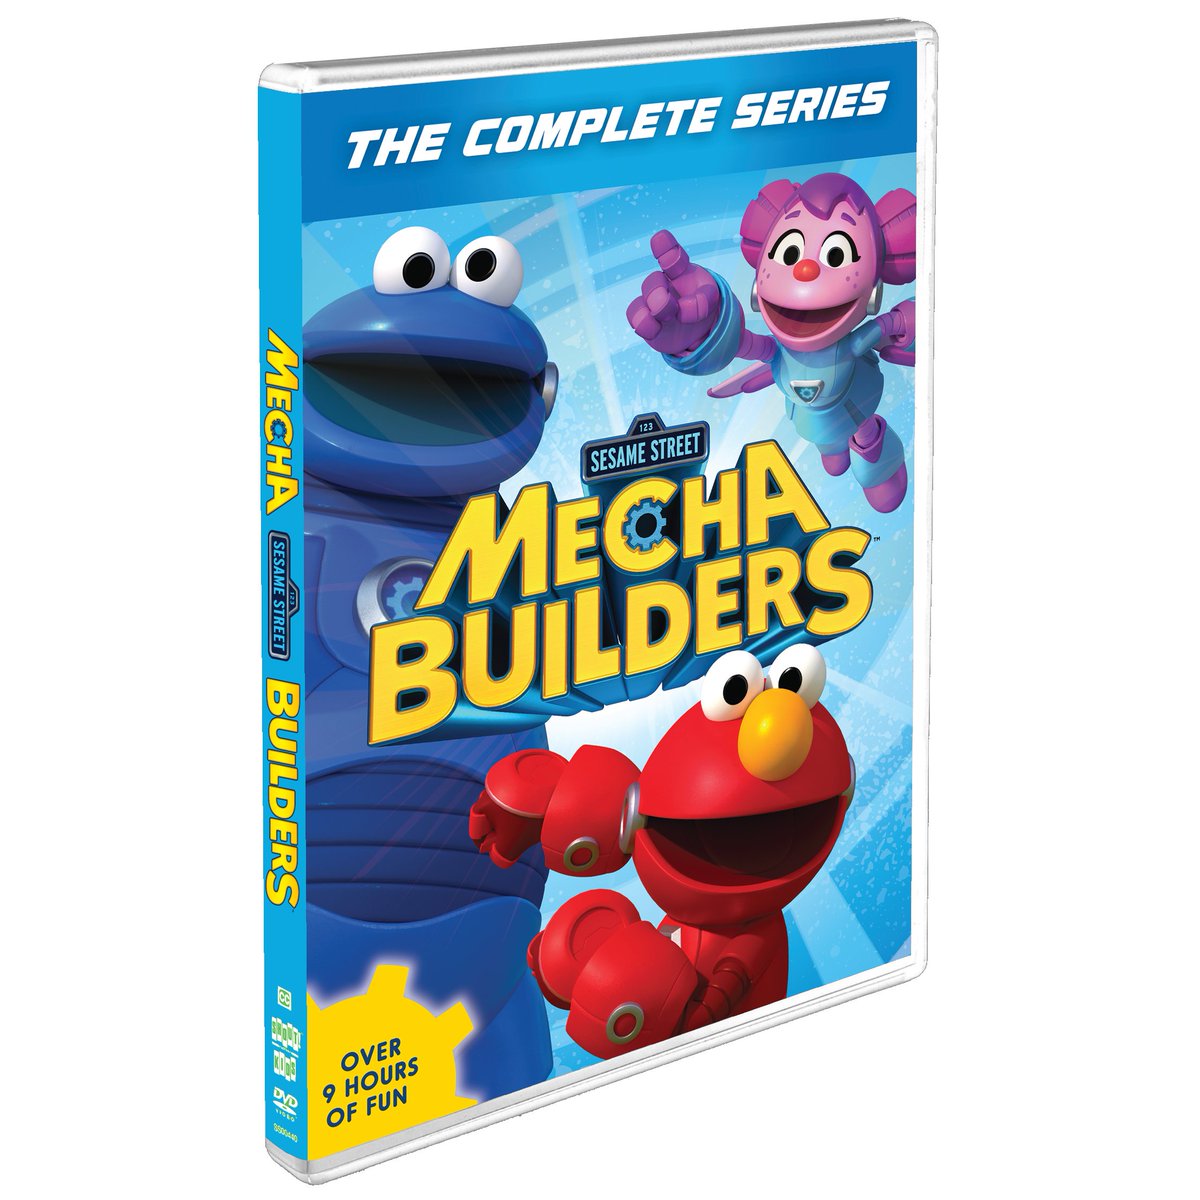 SESAME STREET MECHA BUILDERS: THE COMPLETE SERIES is out now! Join the animated heroes Mecha @AbbyCadabbySST, Mecha @elmo, and Mecha @MeCookieMonster on their missions across all of @sesamestreet. With over 9 hours of fun, the learning never stops: amazon.com/Sesame-Street-…